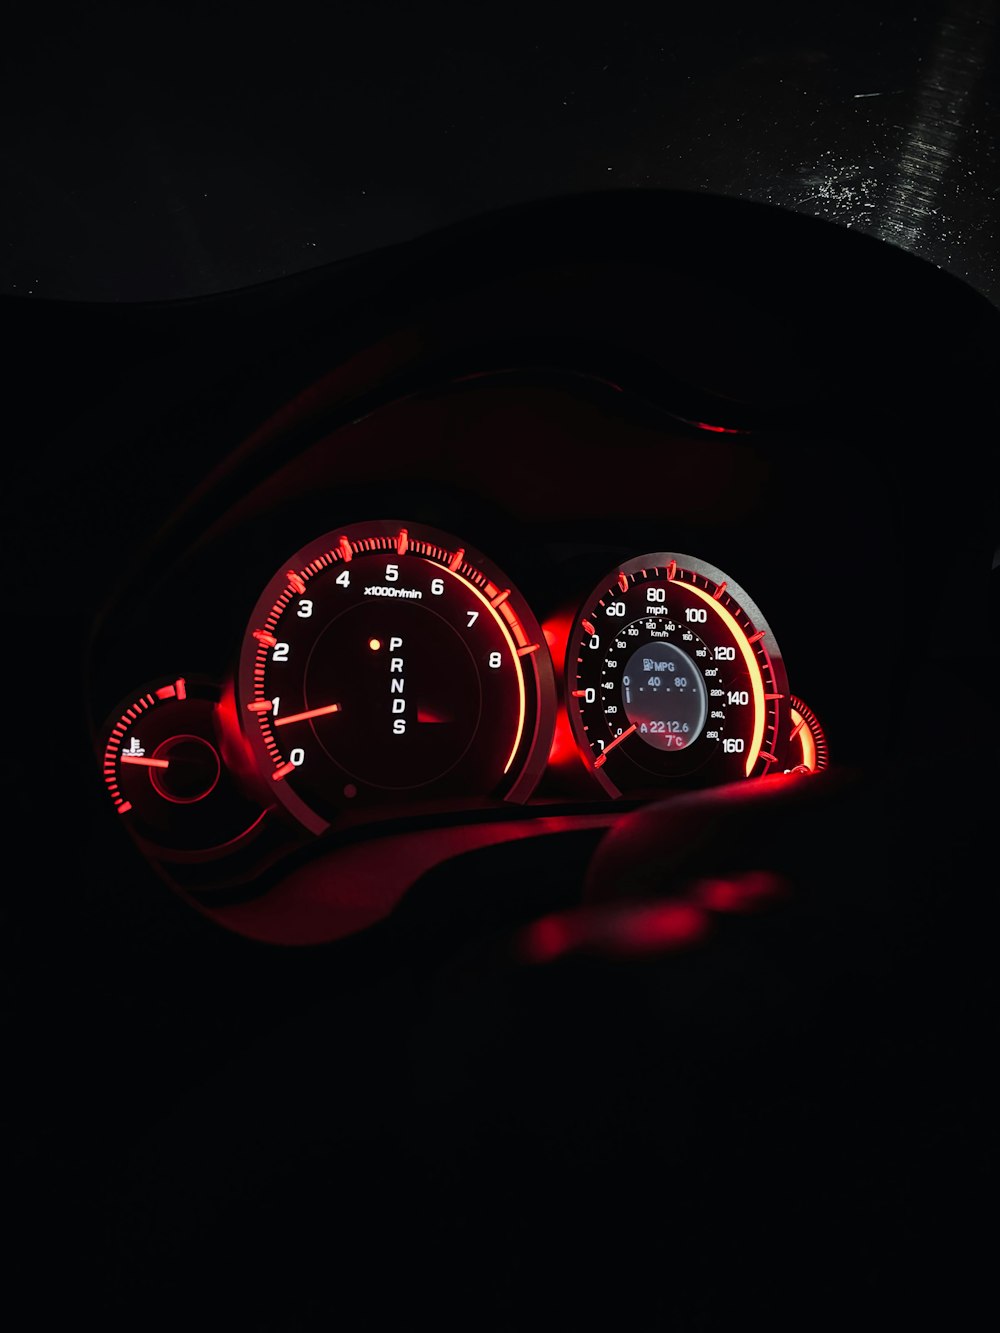 the dashboard of a car with red lights